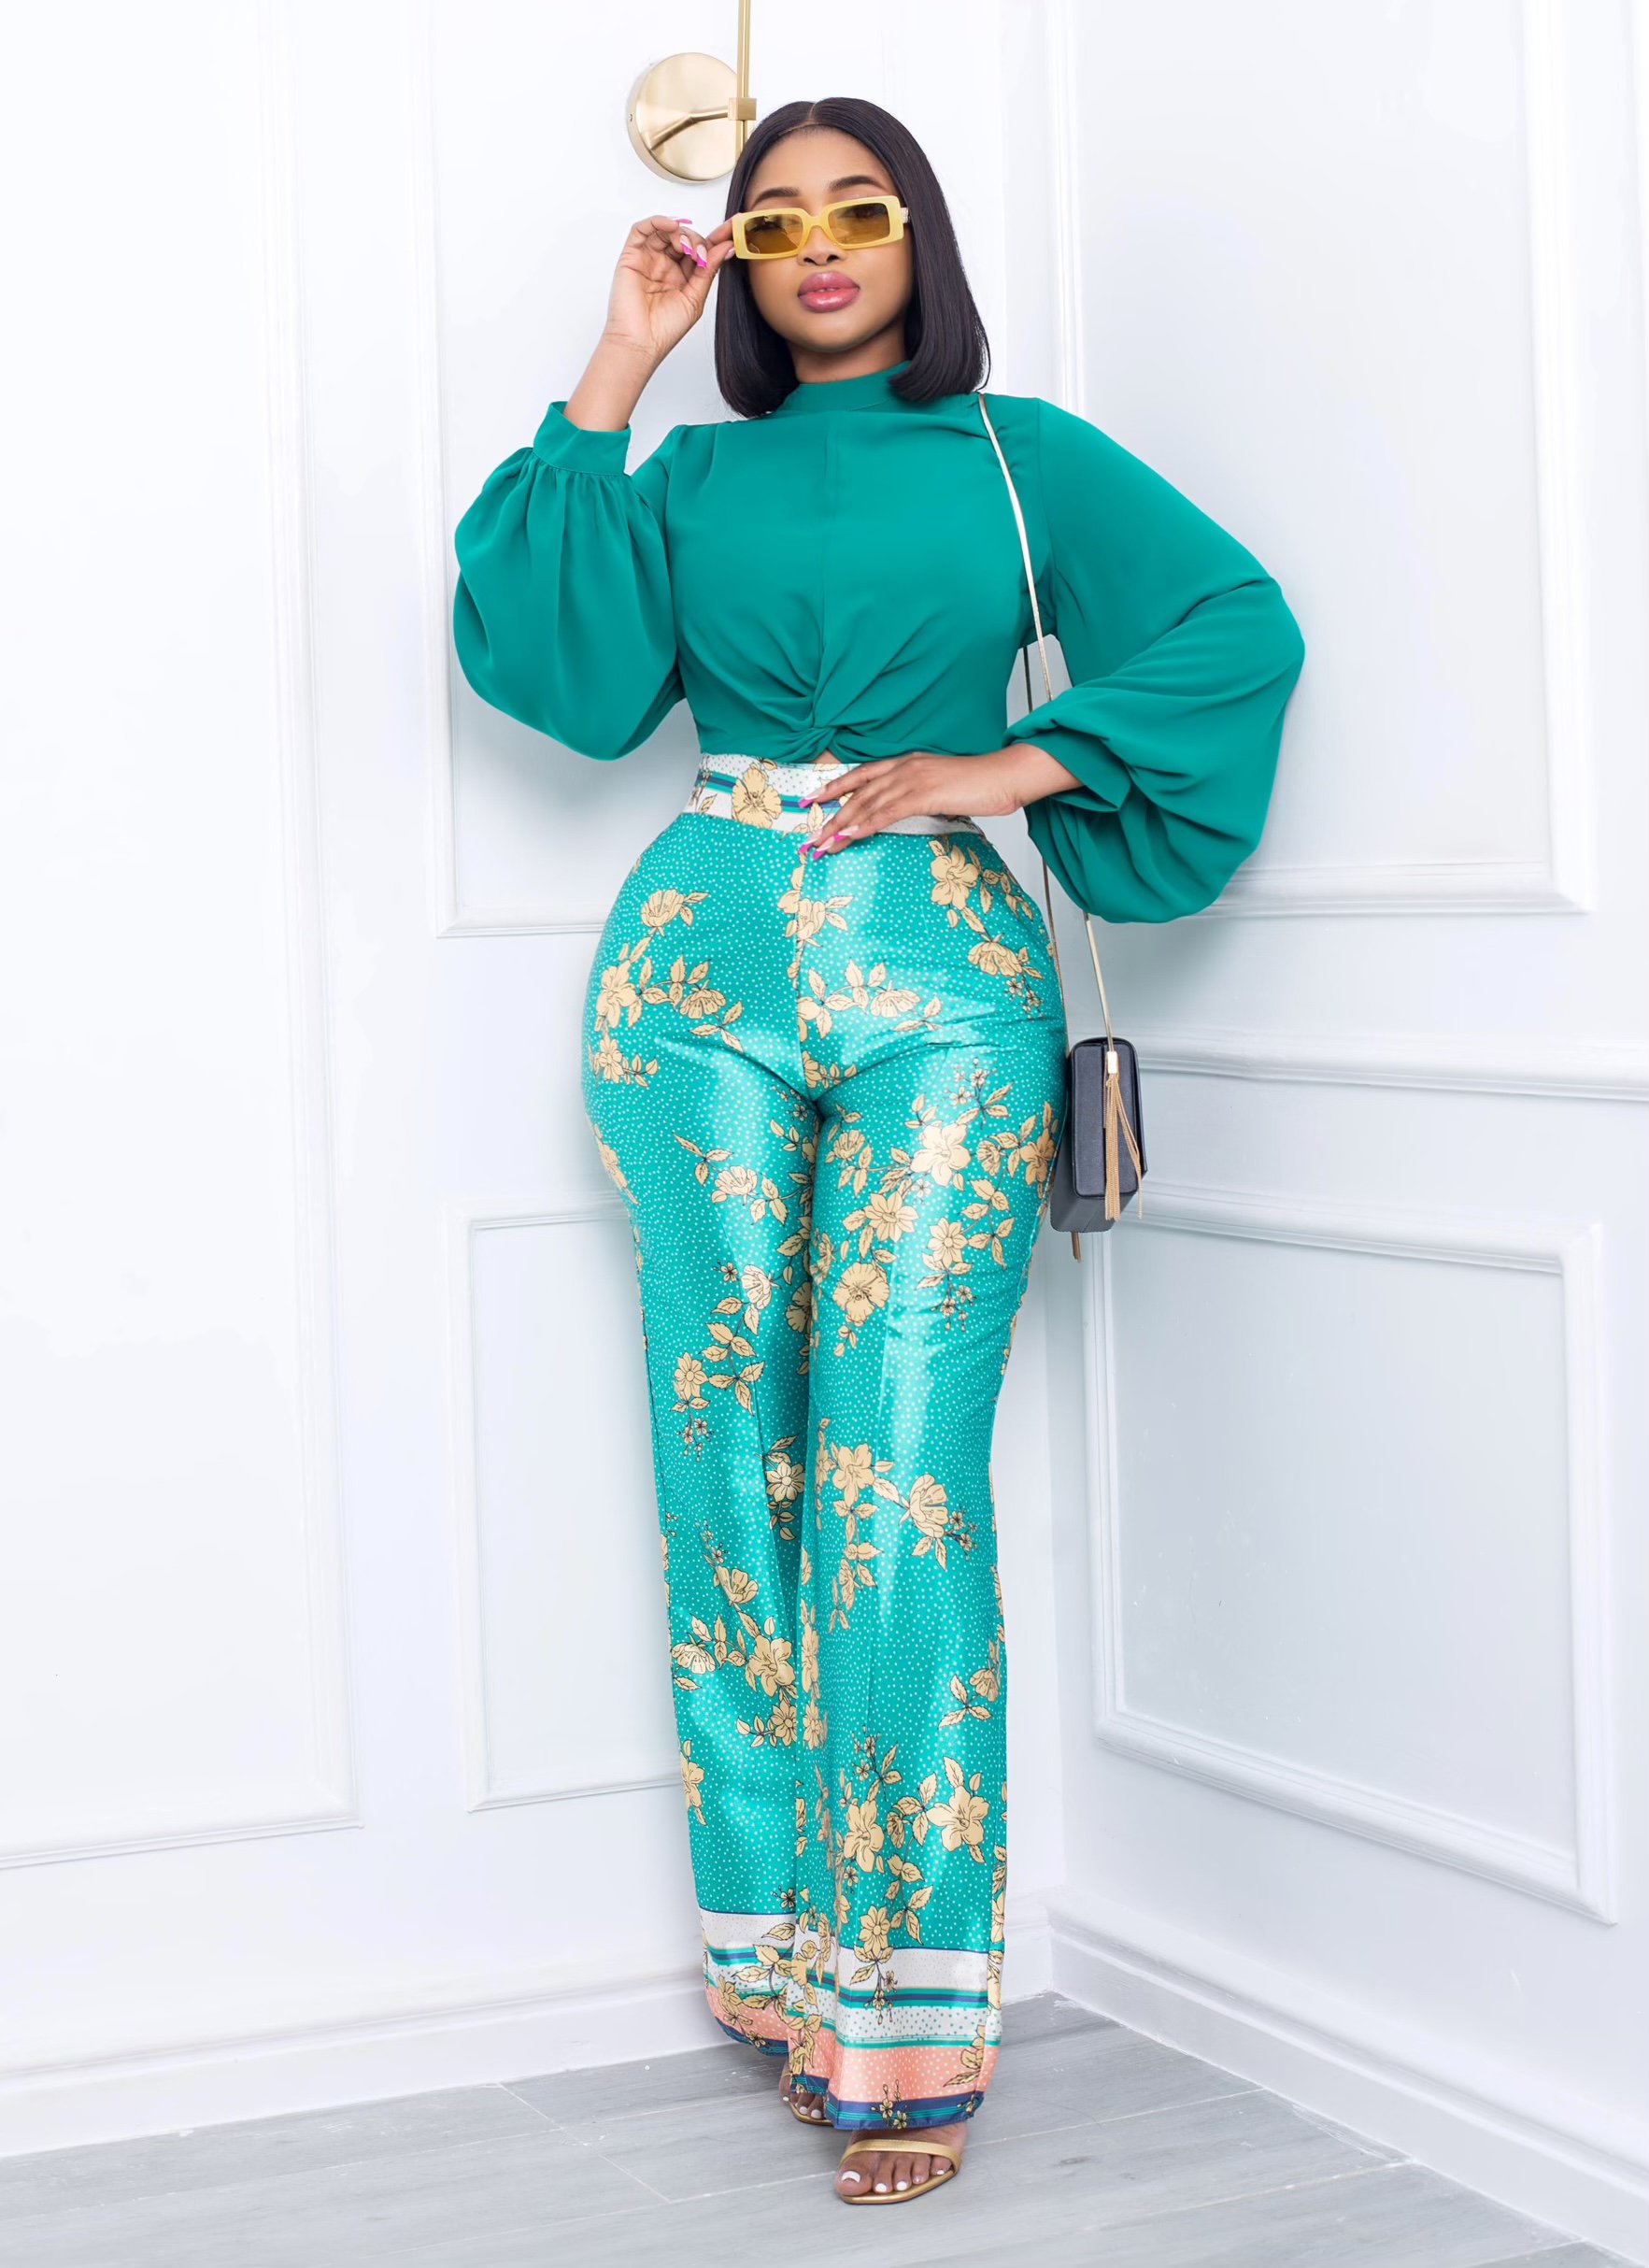 23 WideLeg Trousers to Wear With Every Summer Outfit  Who What Wear